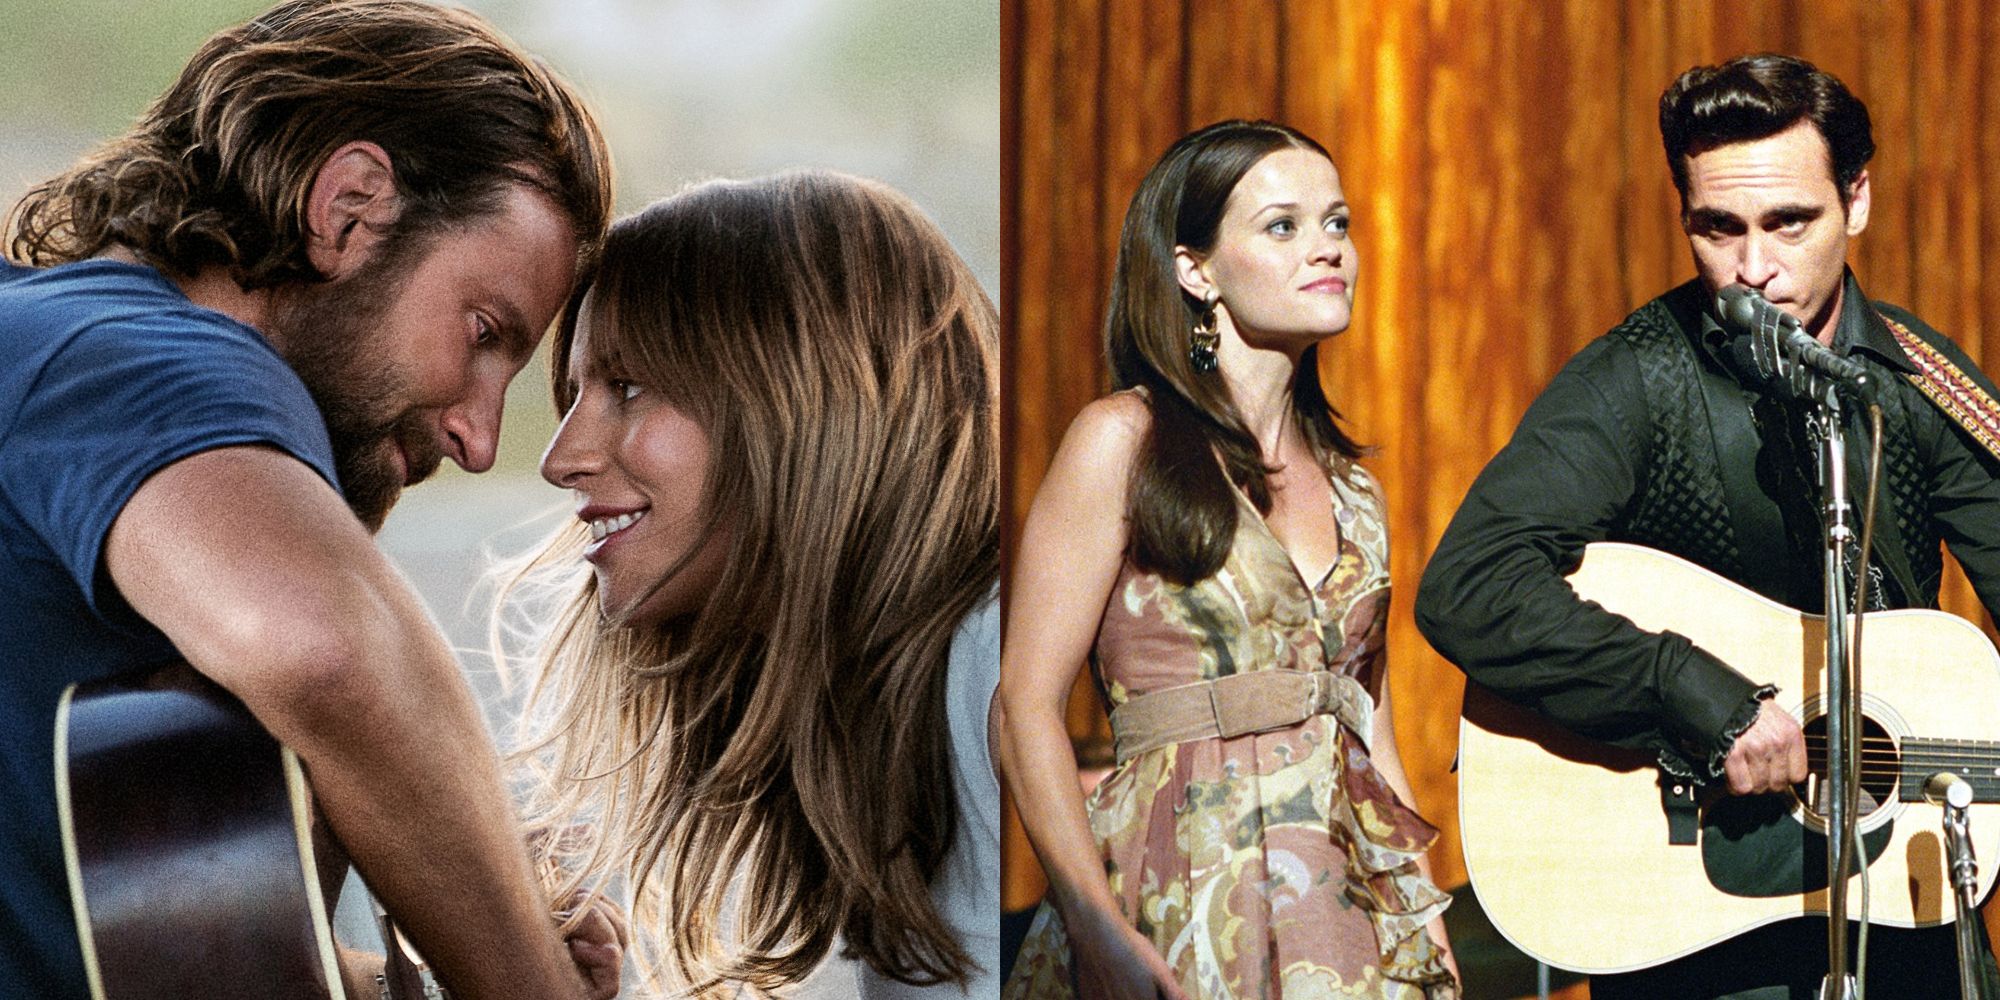 Split image showing characters from A Star Is Born and Walk the Line.